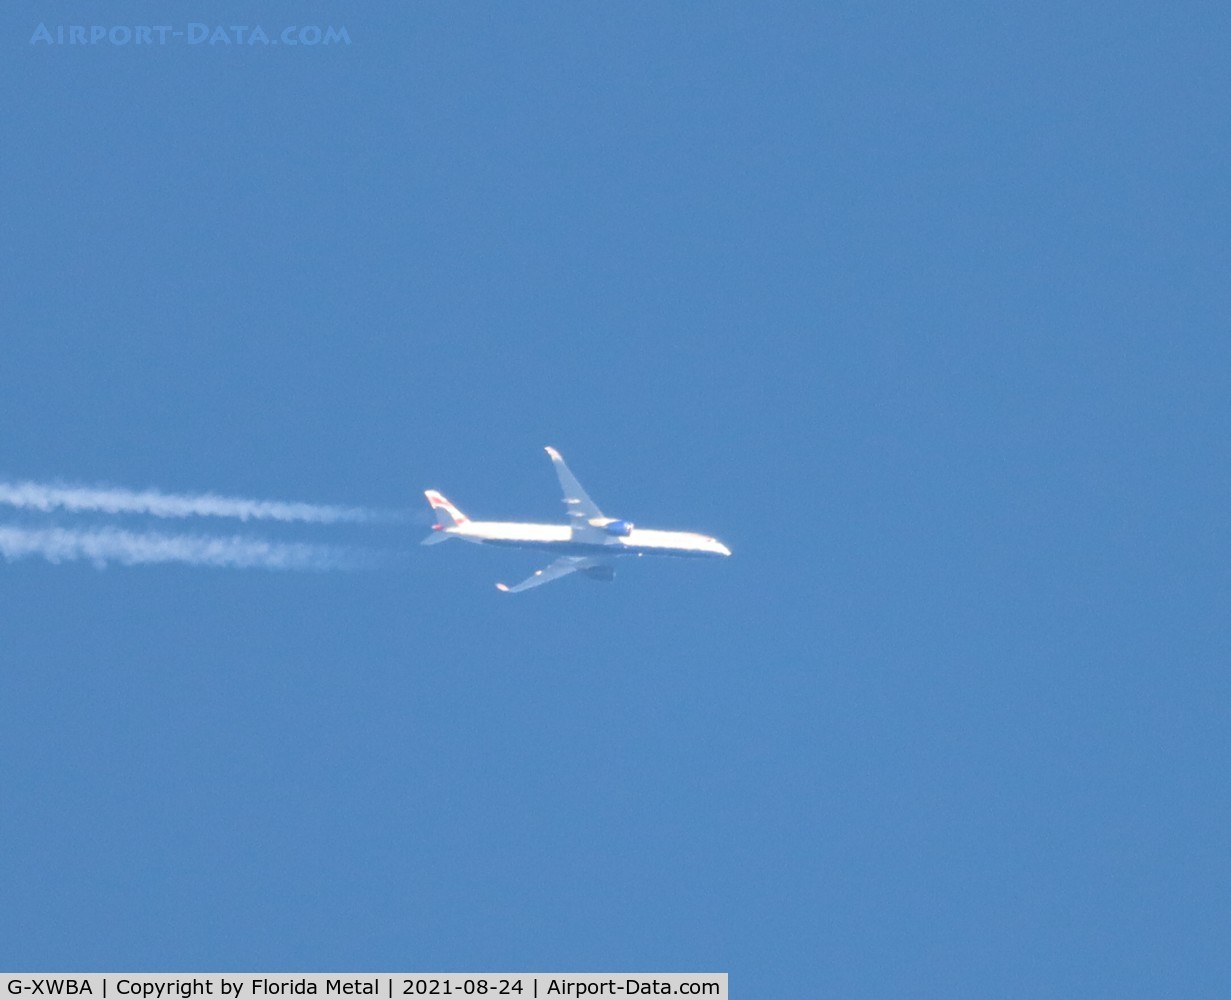 G-XWBA, 2019 Airbus A350-1041 C/N 326, In Flight over Detroit area from LHR to ORD avoiding line of storms